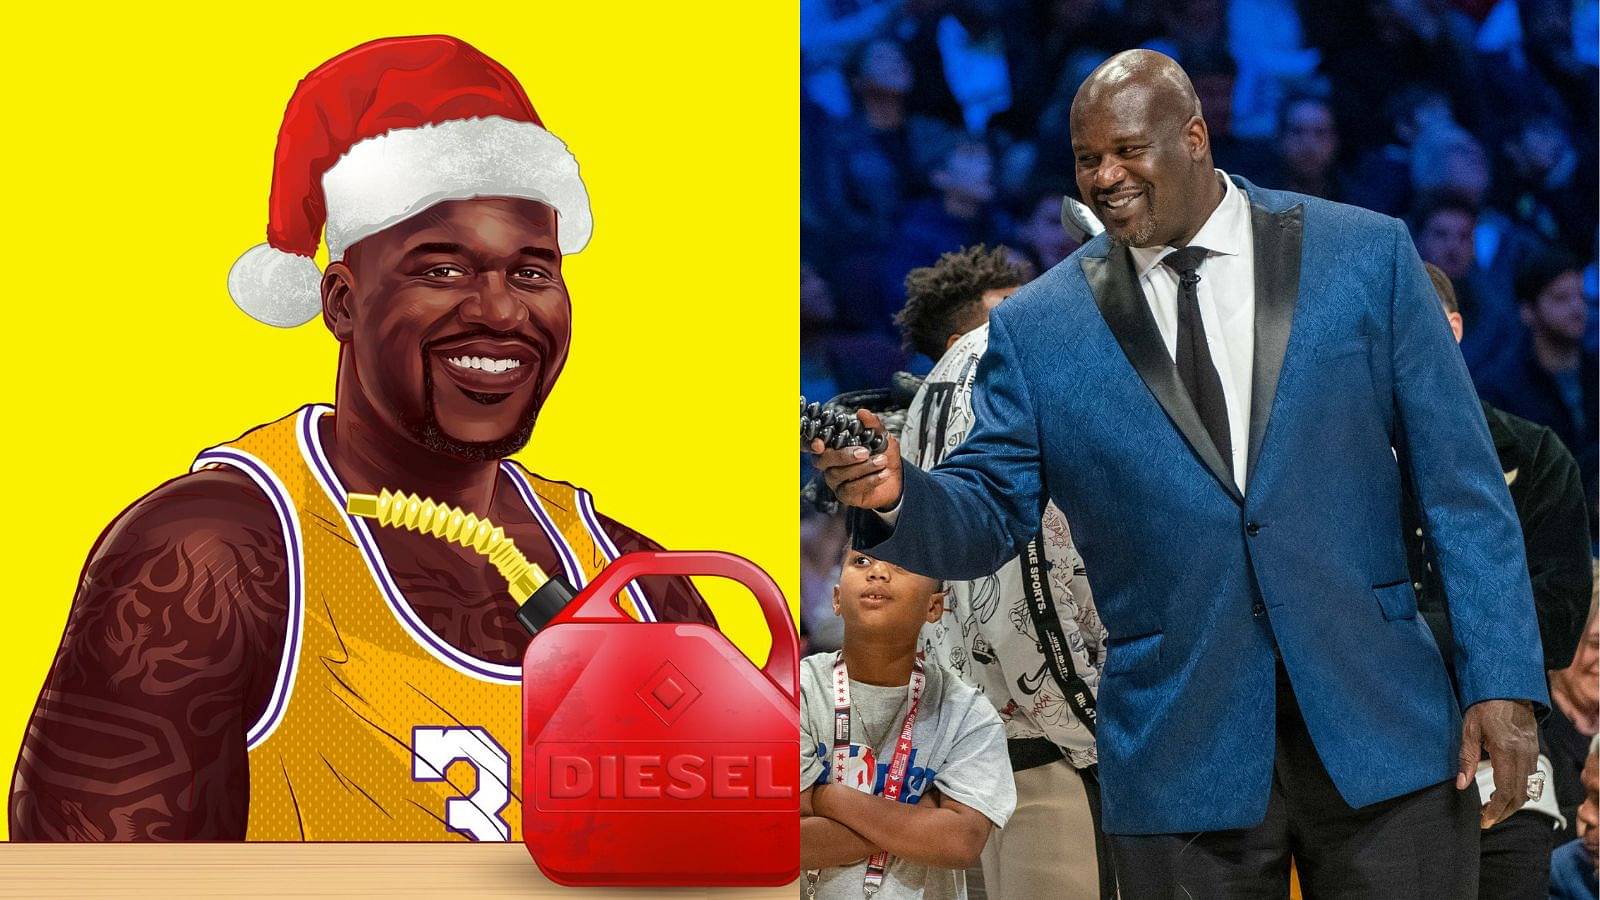 Shaquille O’Neal's $2 million ‘NFT gesture’ for underprivileged kids shows his magnanimous nature